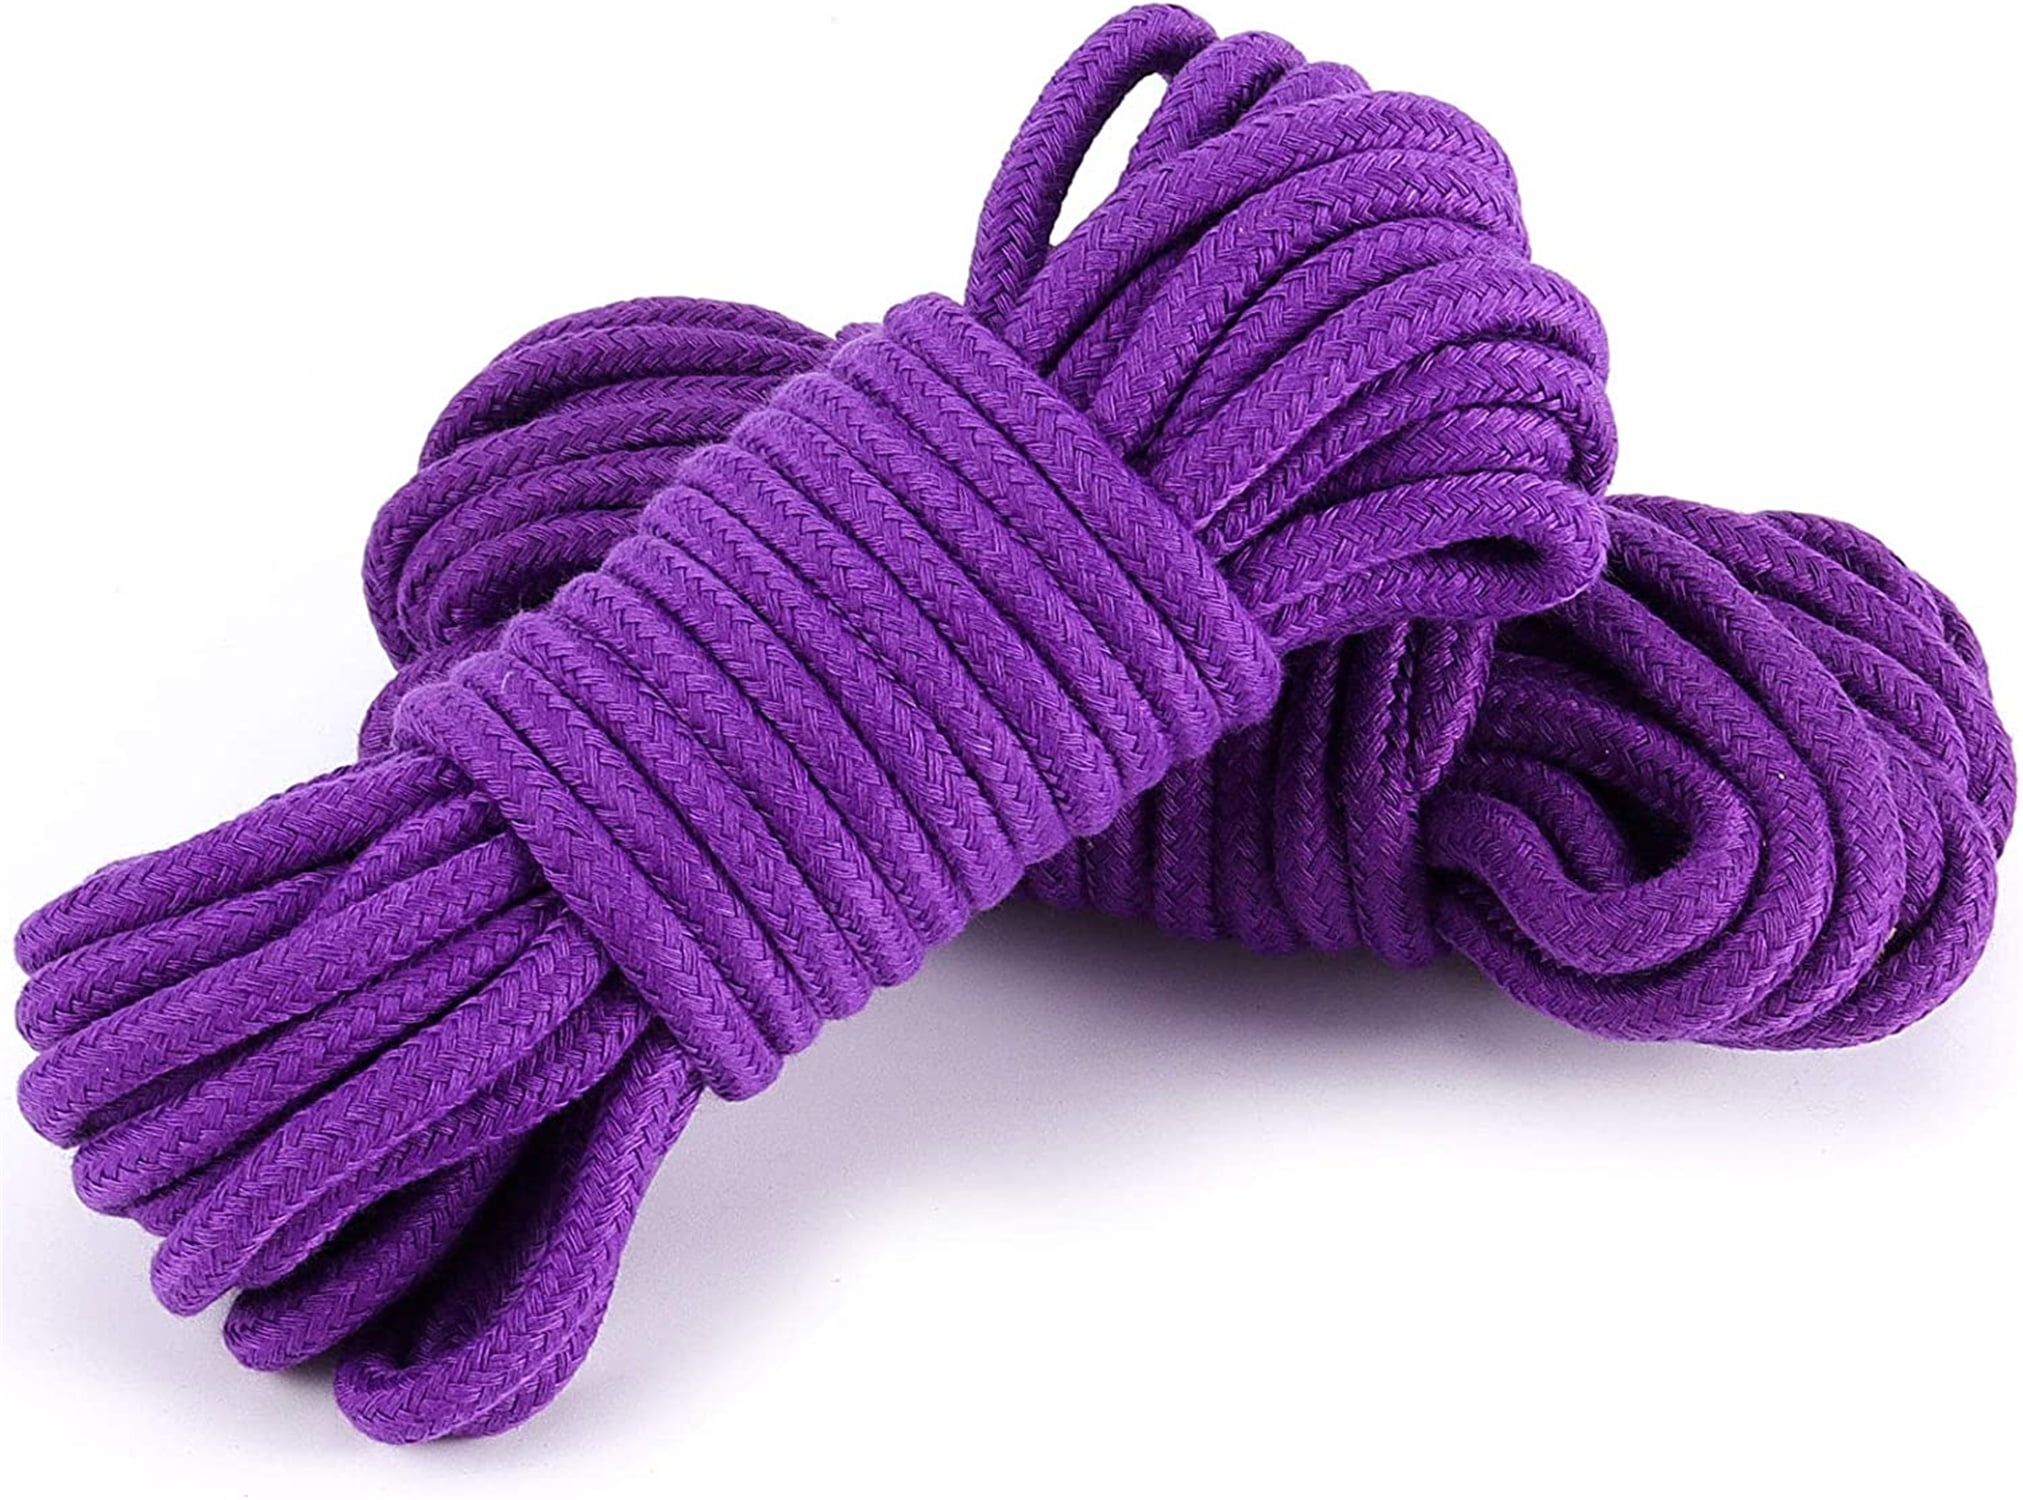 Bookishbunny 32ft Soft Durable Cotton Rope Strap Various Color Black Purple Red Pink 2 Pack at MechanicSurplus.com